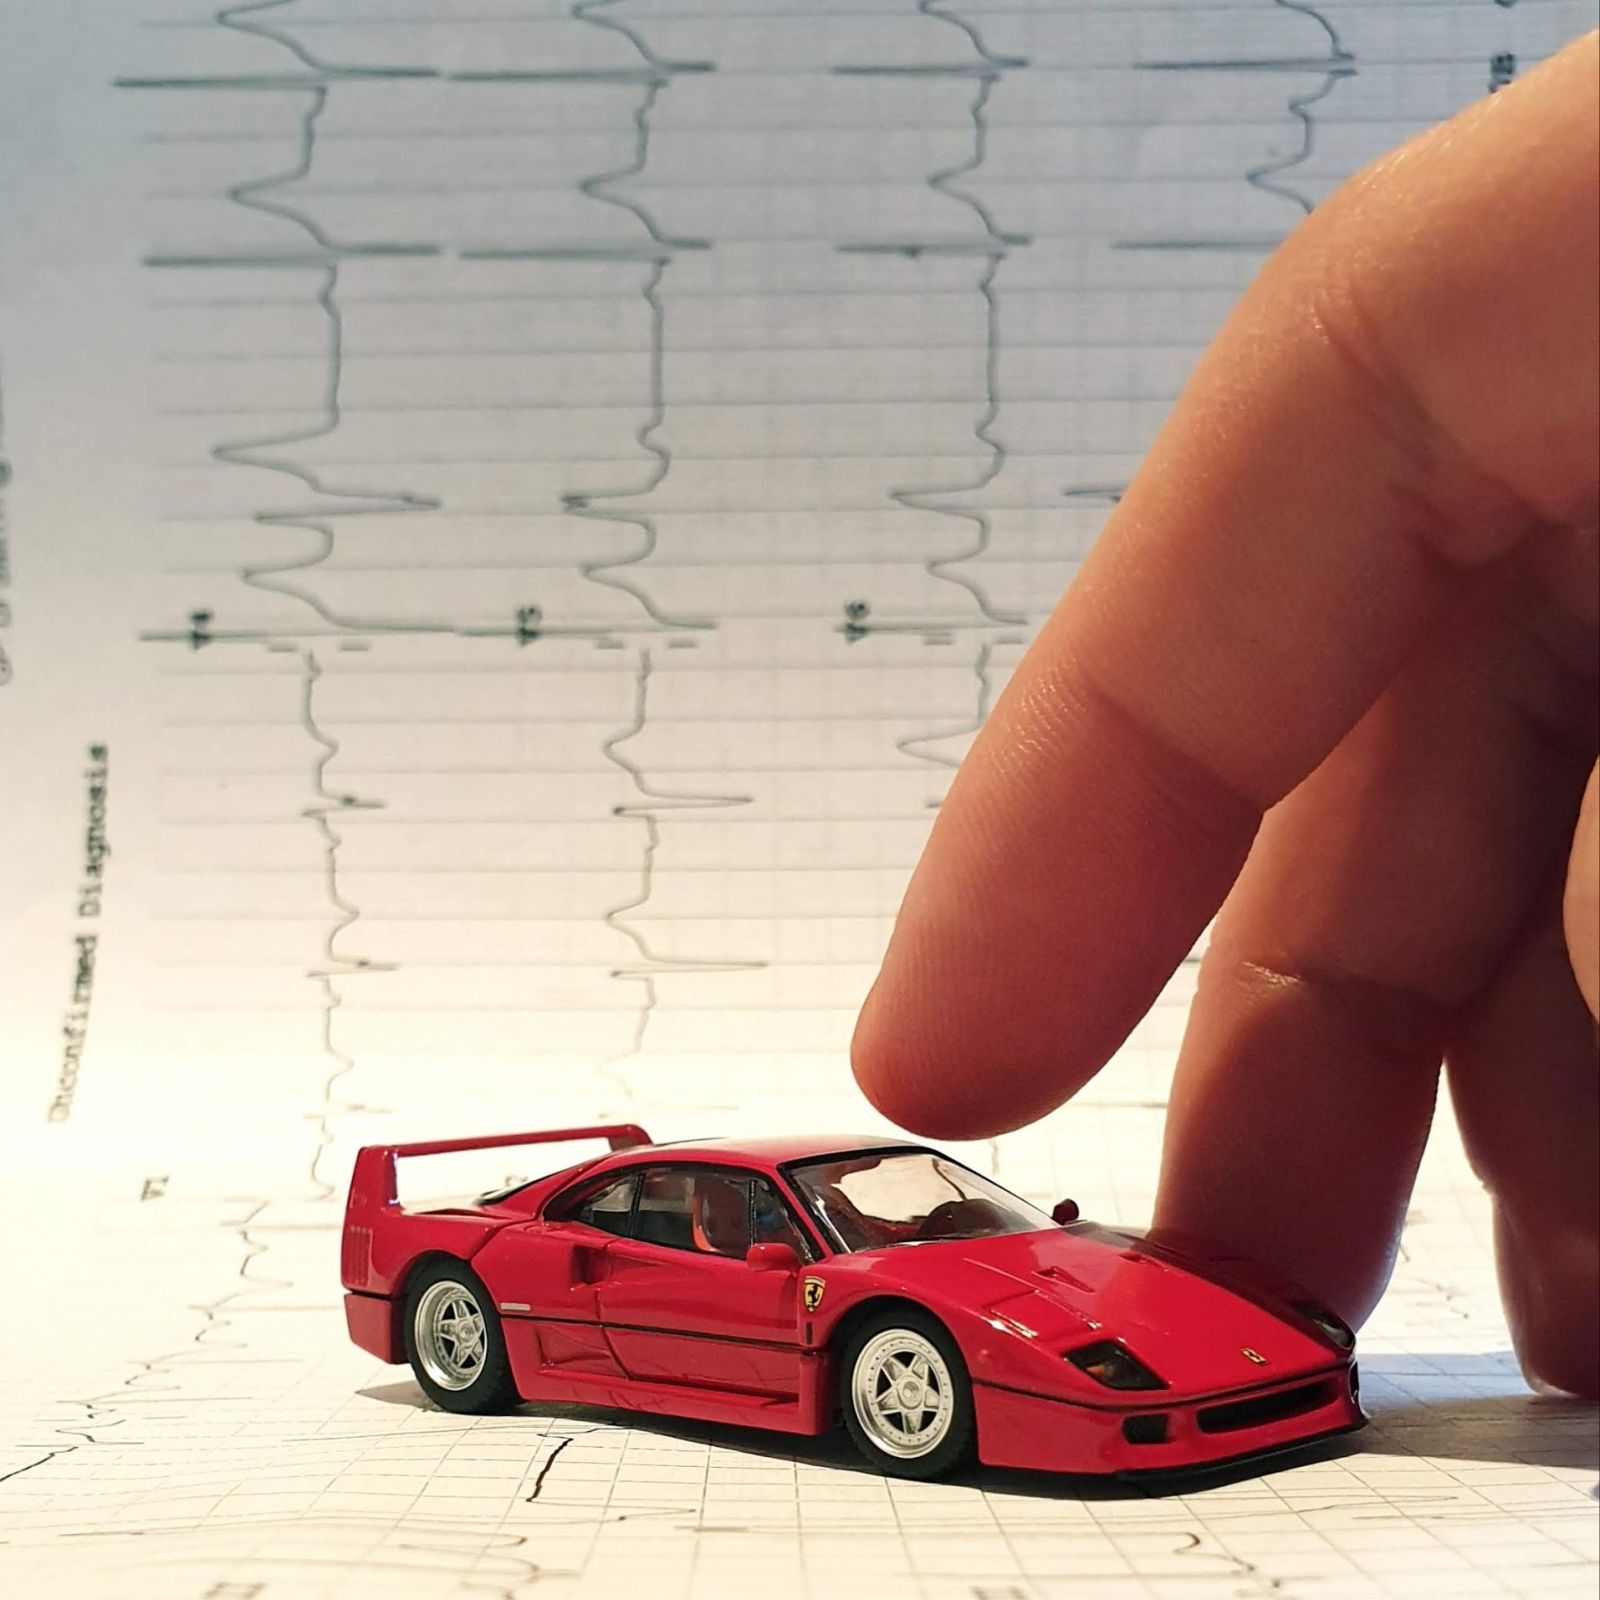 Illustration for article titled I now own a Ferrari F40